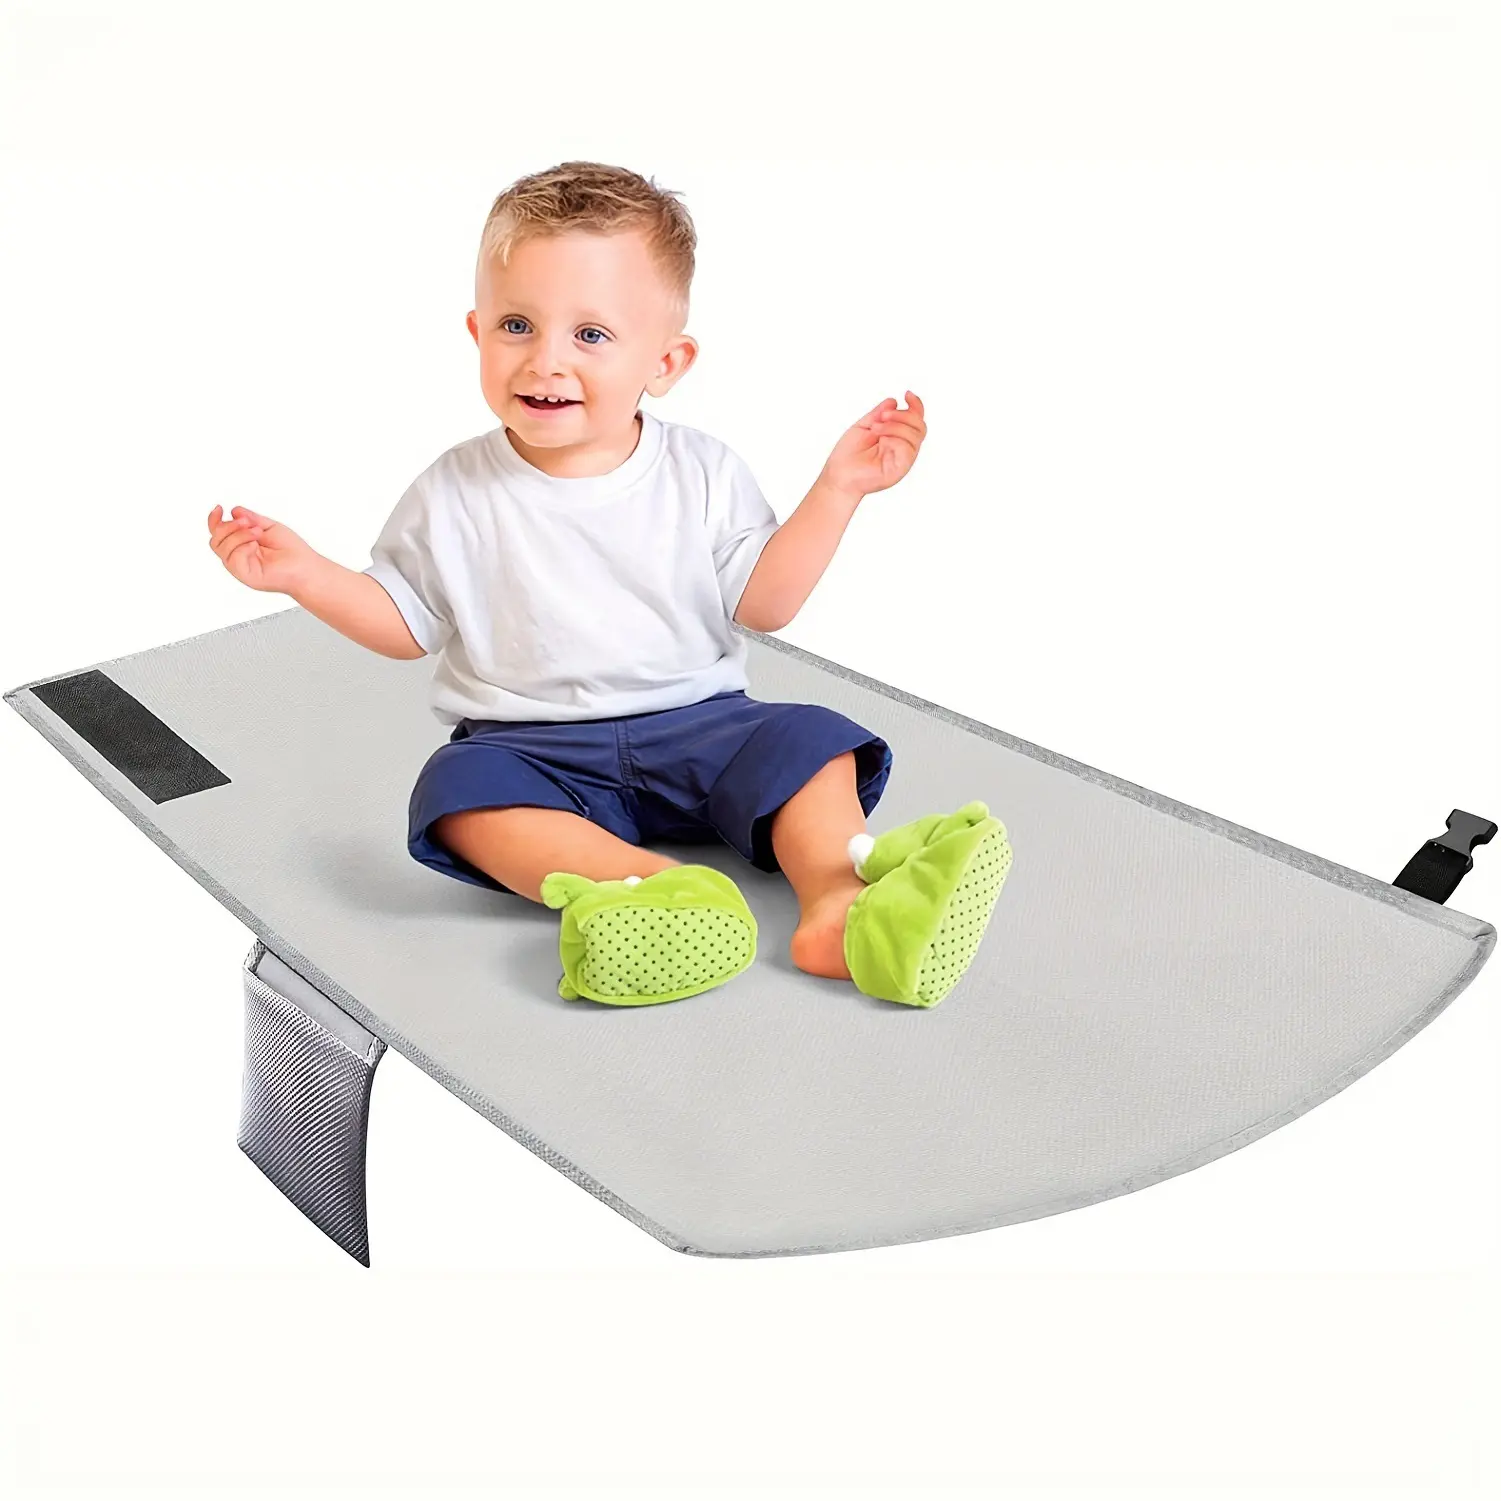 Airplane Seat Extender for Kids Toddler Travel Bed on Airplane ,Wide Airplane Seat Travel Bed Footrest